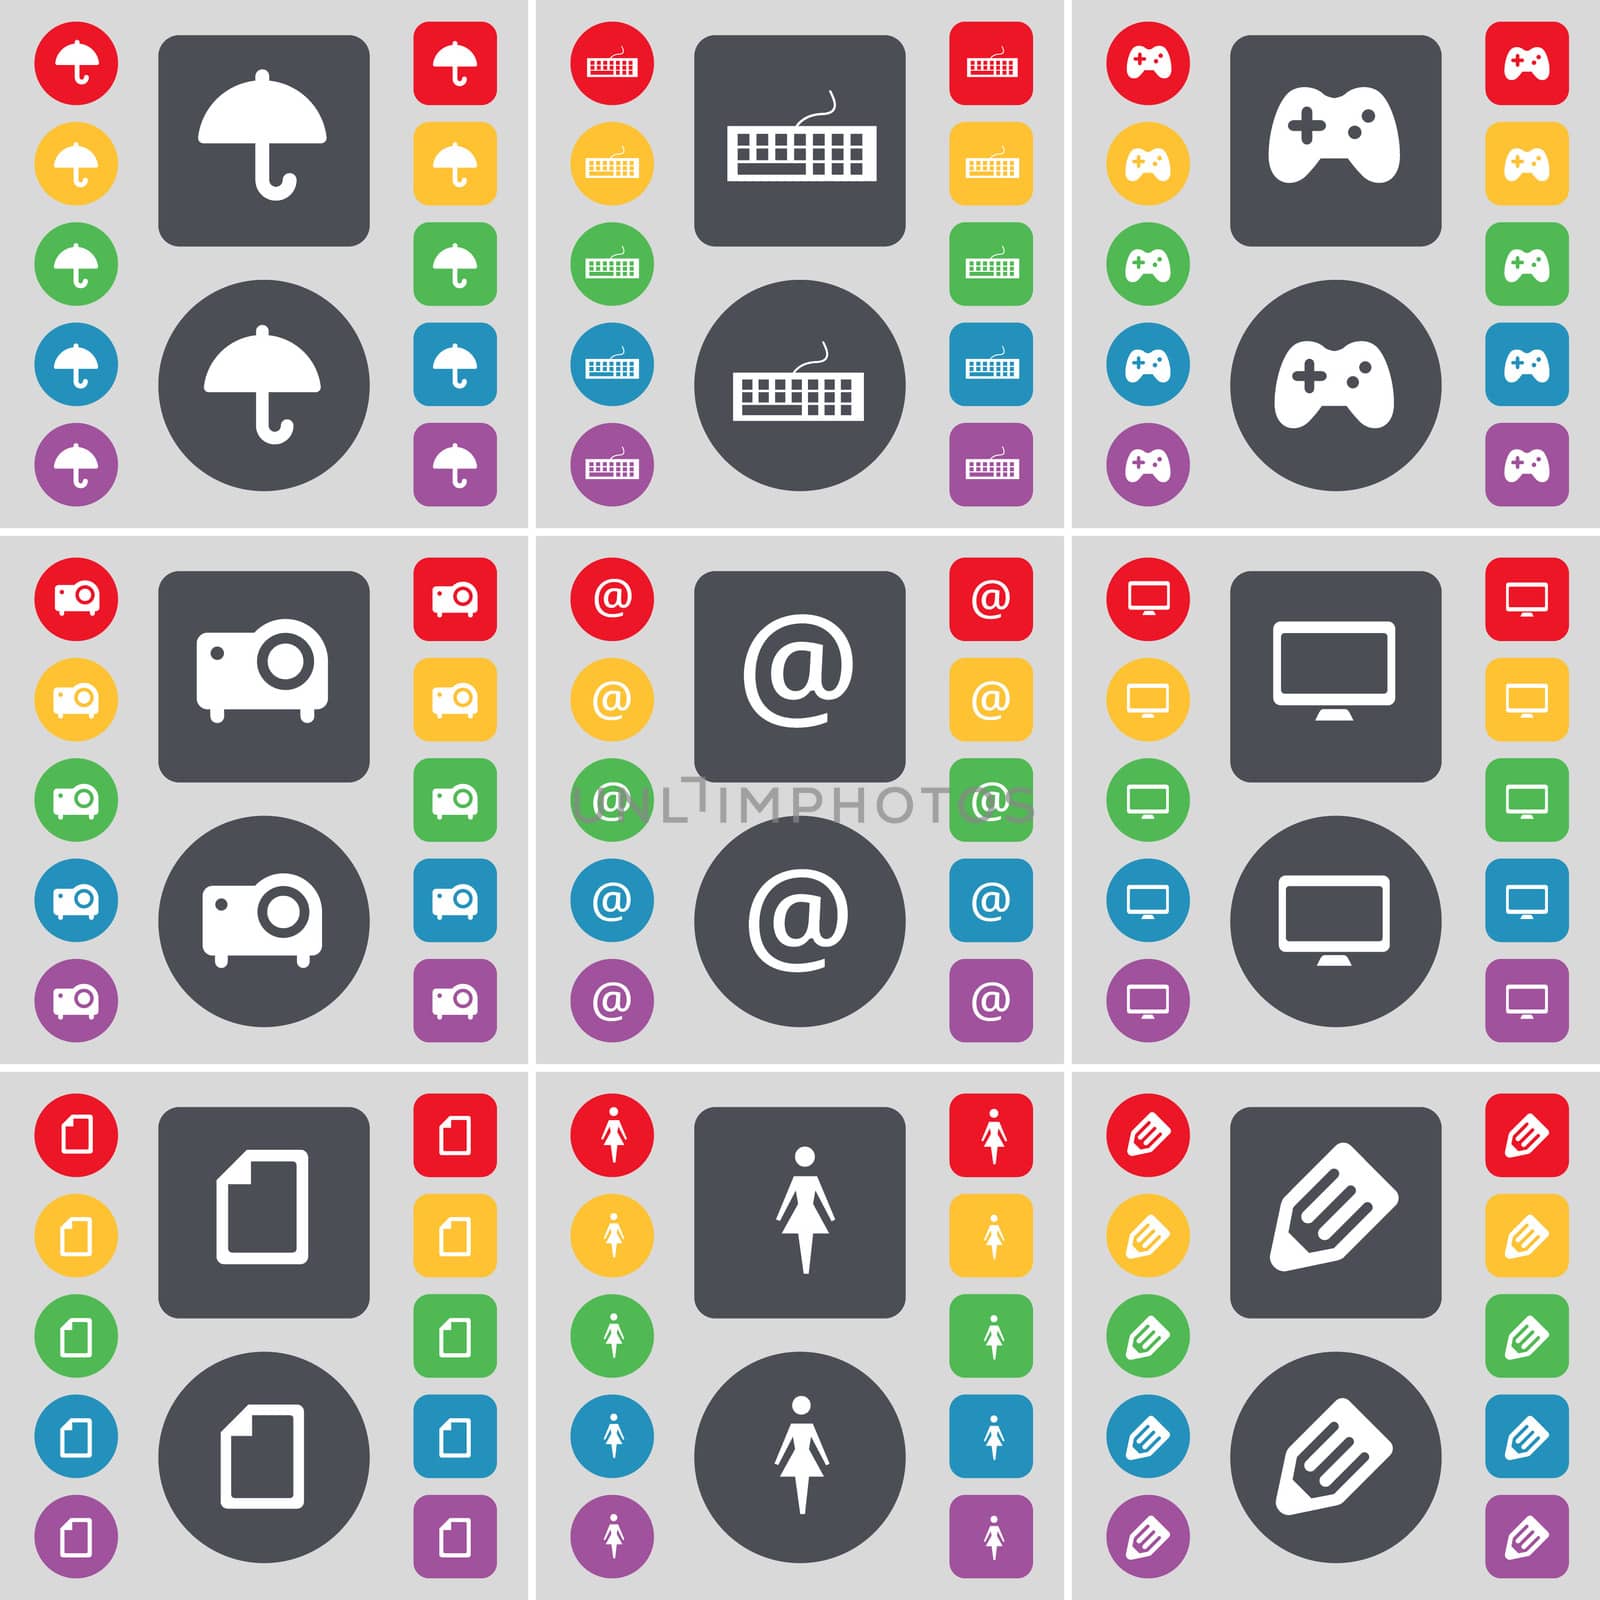 Umbrella, Keyboard, Gamepad, Projector, Mail, Monitor, File, Silhouette, Pencil icon symbol. A large set of flat, colored buttons for your design.  by serhii_lohvyniuk